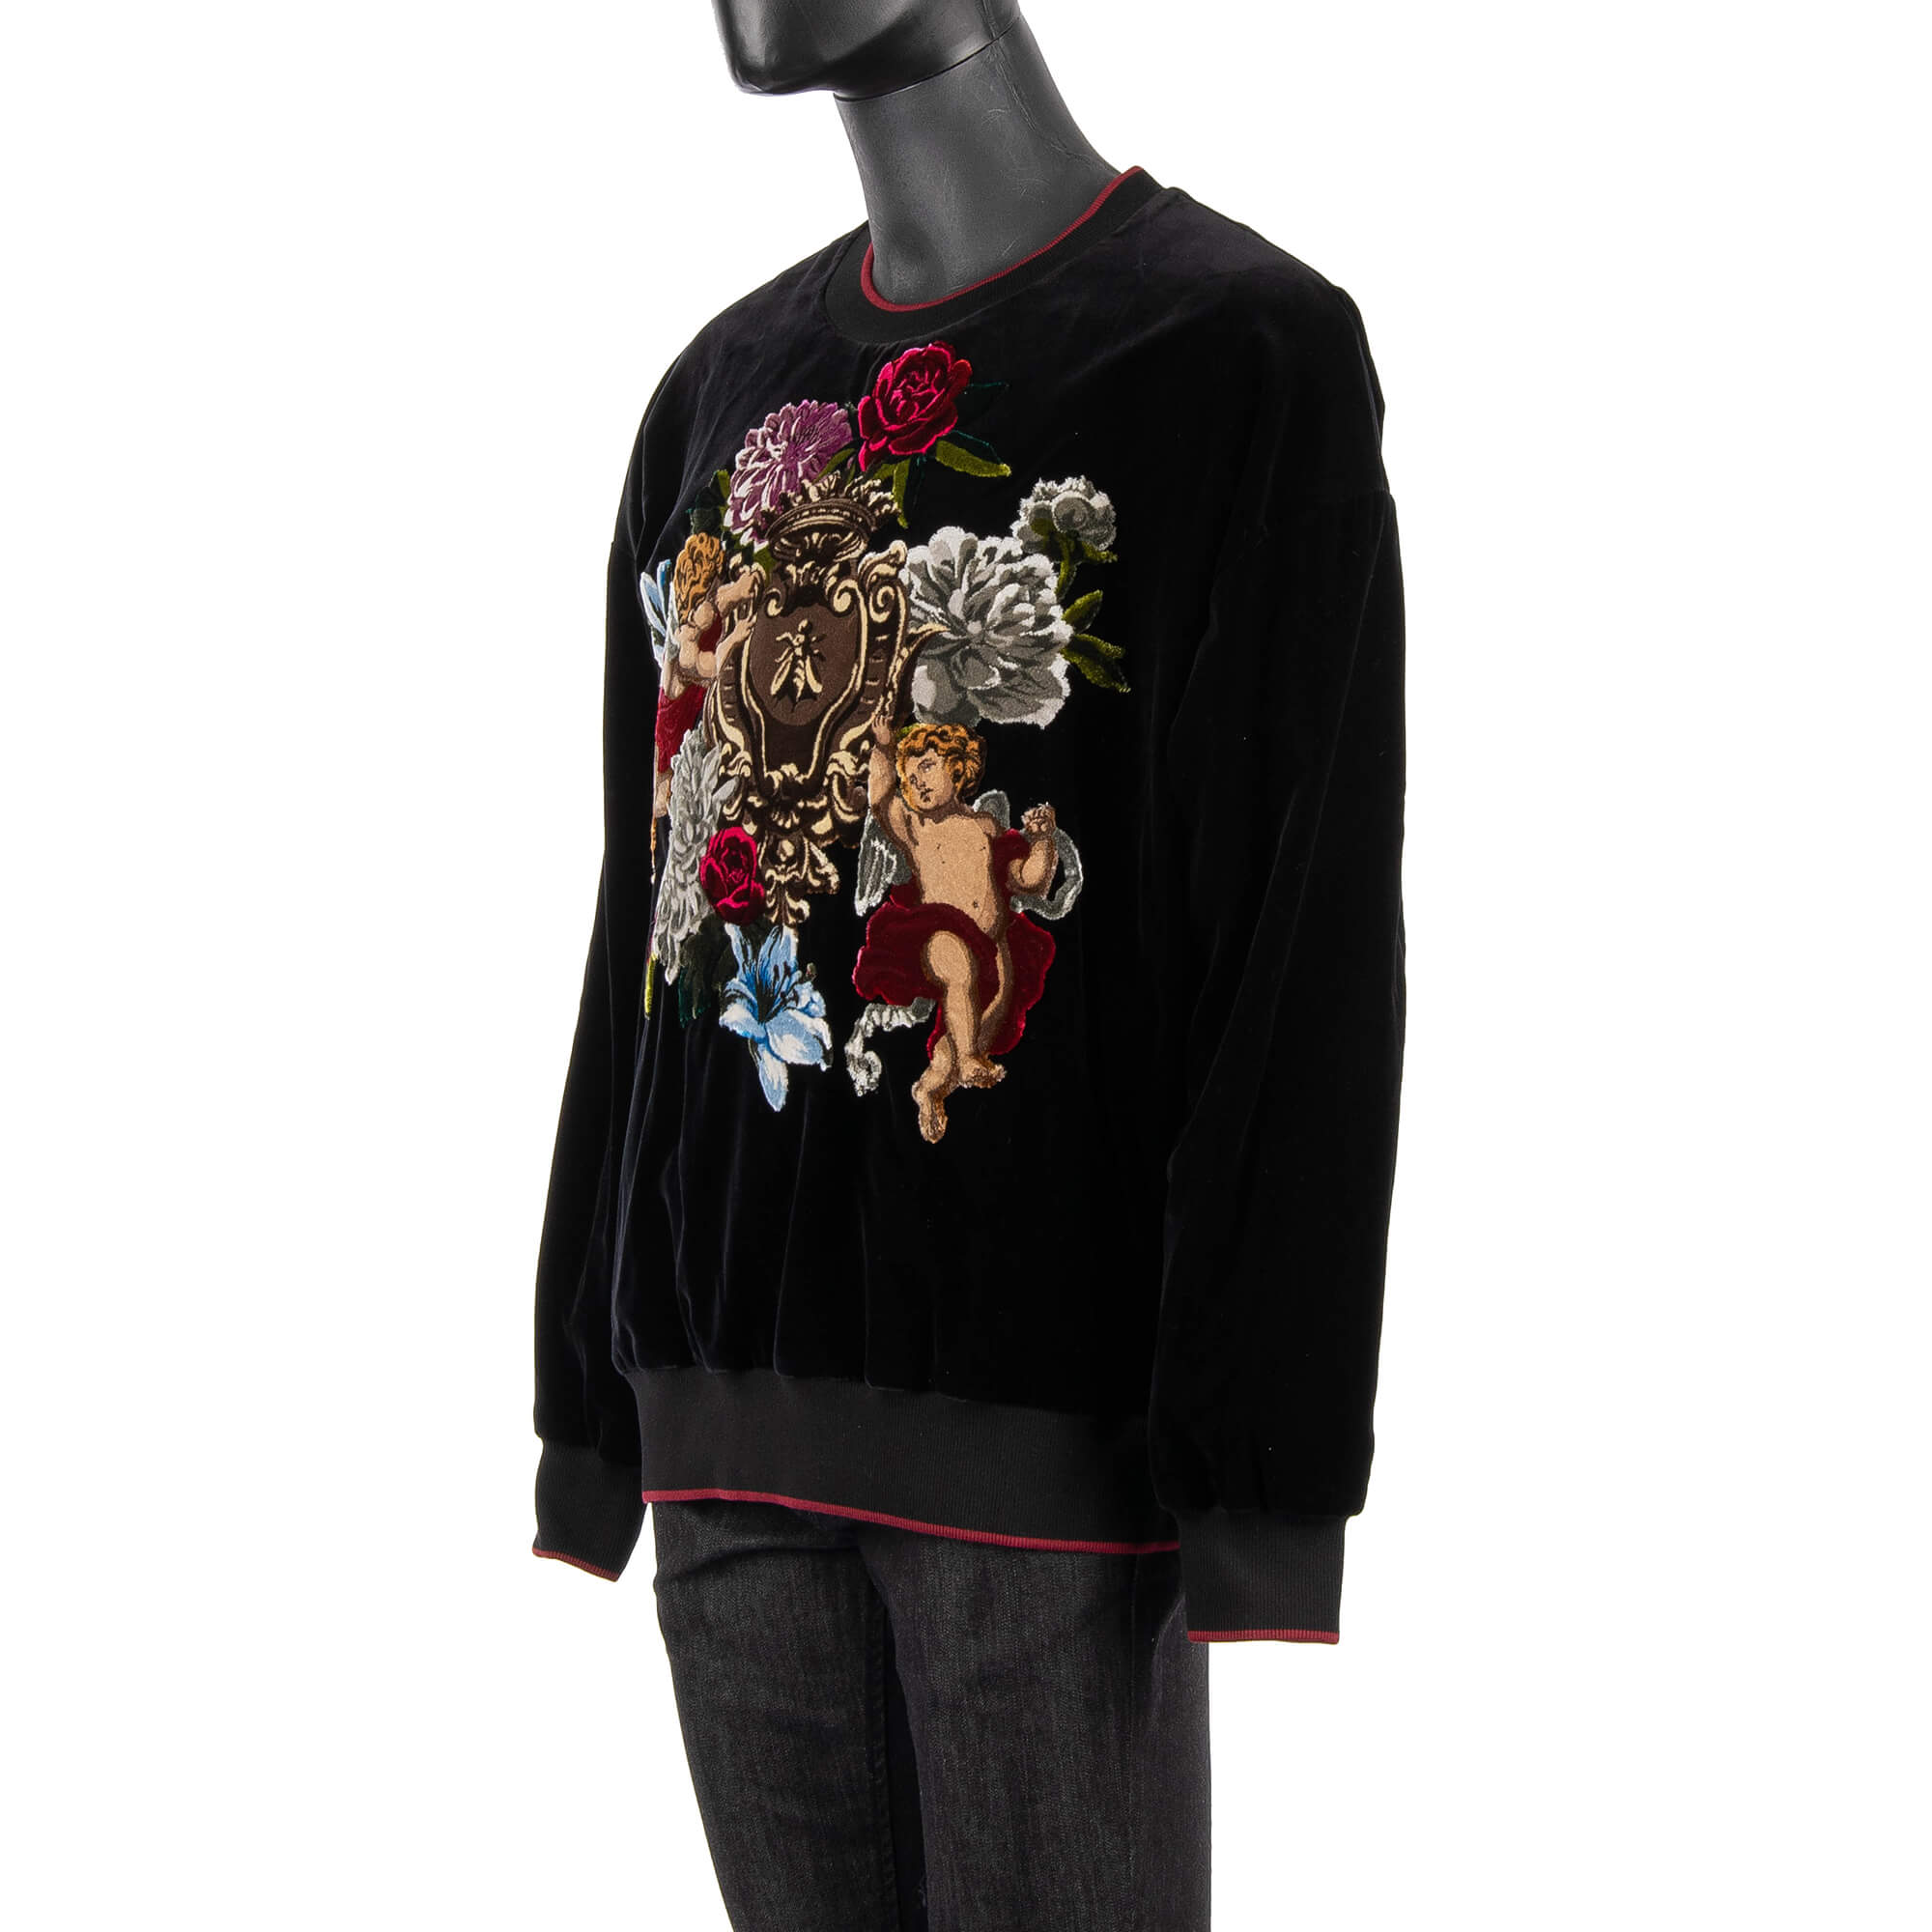 Velvet-Sweater-with-Baroque-Angels-and-Flowers-Application-Black-Red-2.jpg